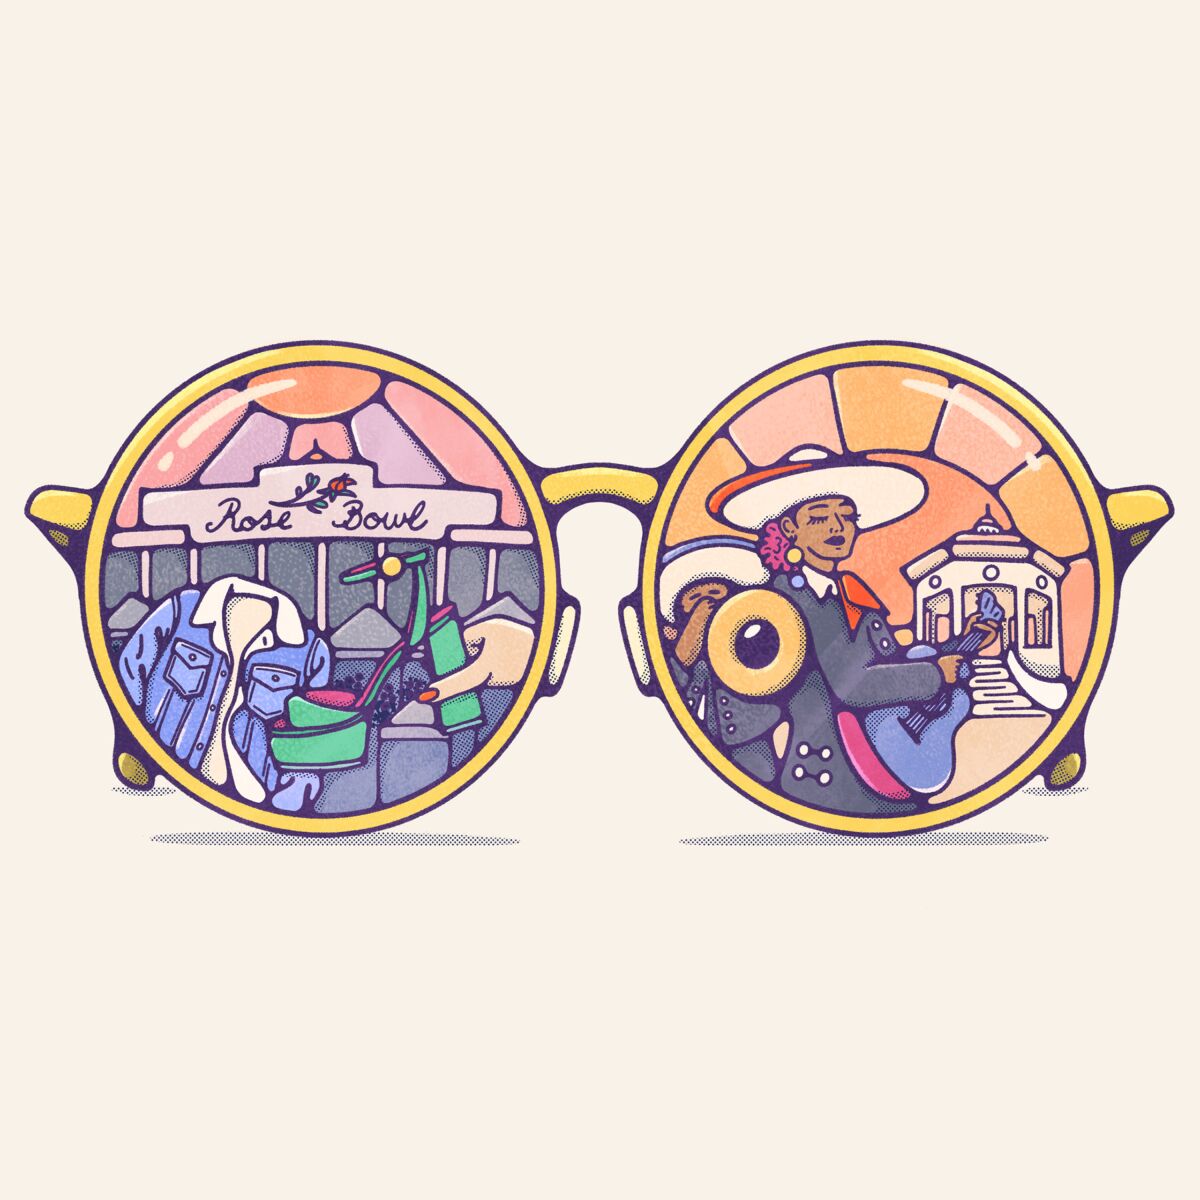 An illustration of round gold sunglasses with reflections of clothes shopping at the Rose Bowl and mariachis.